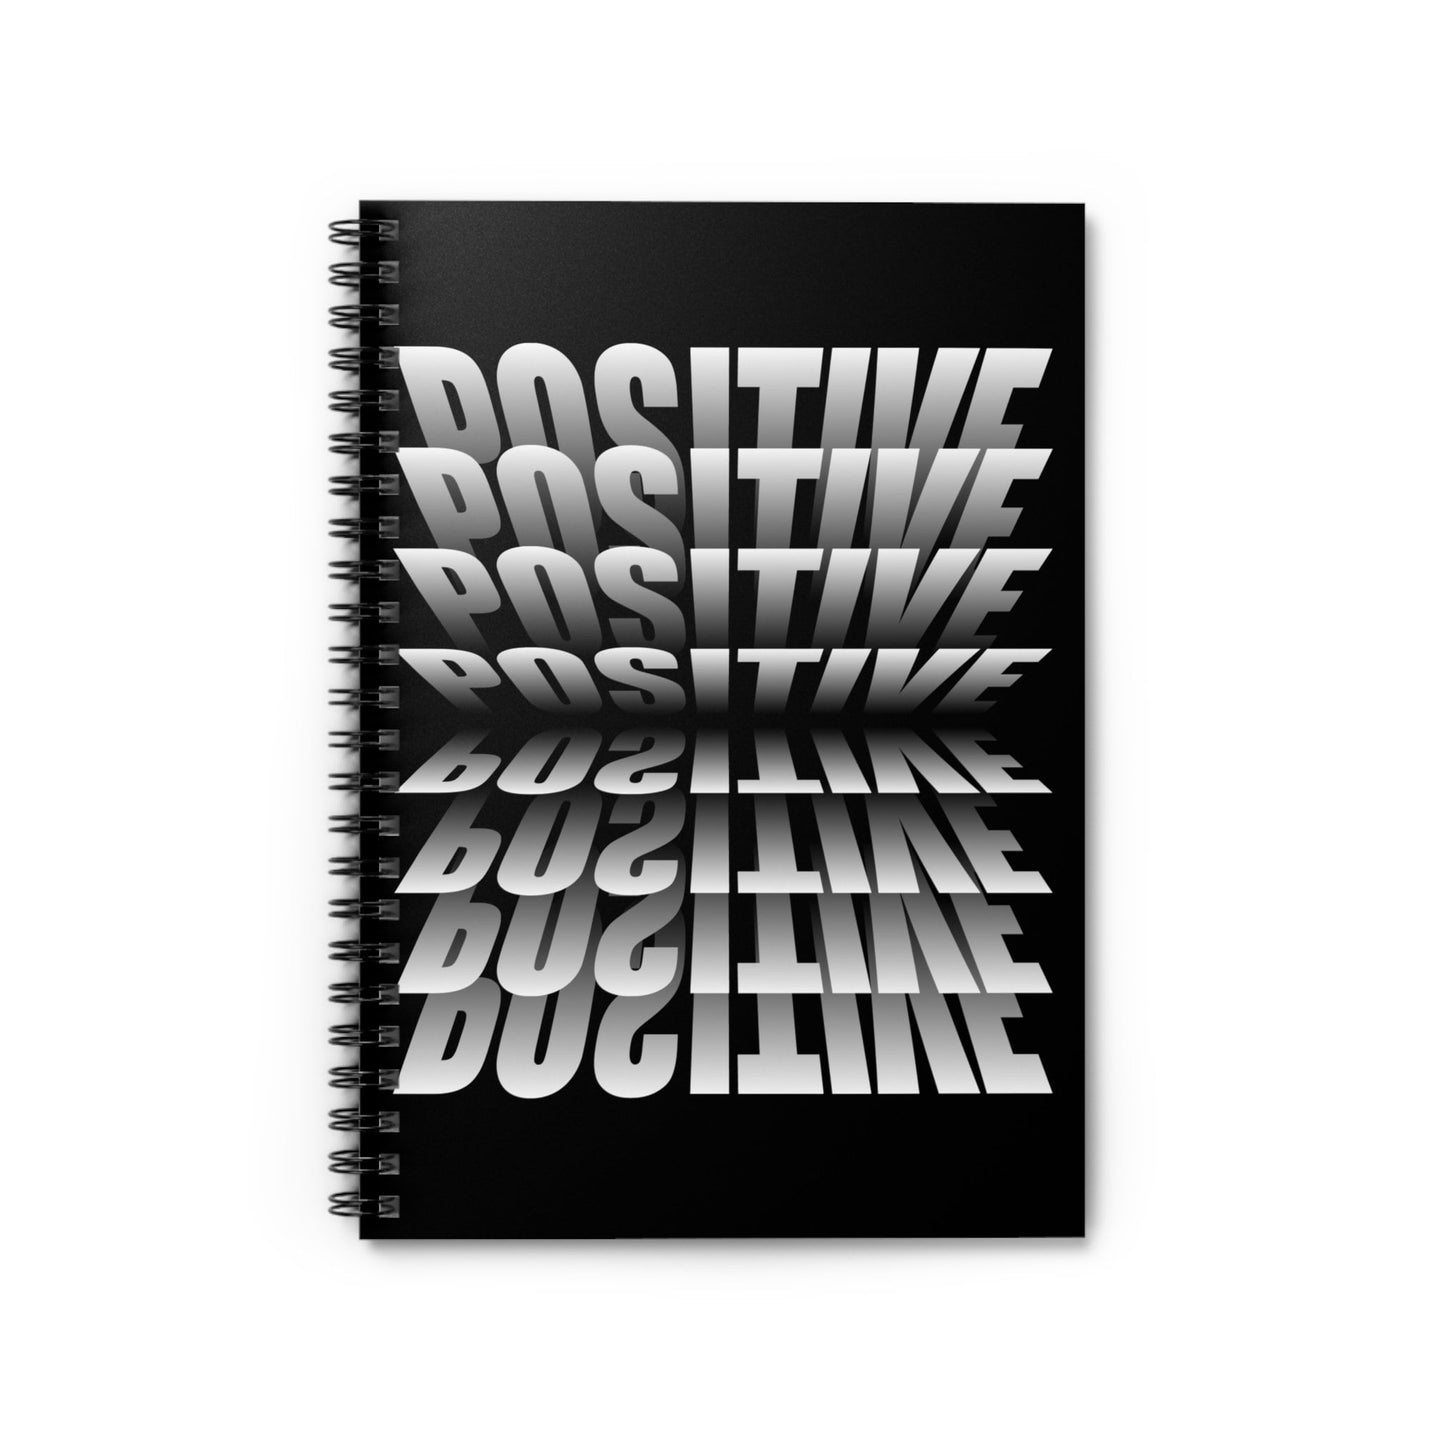 Positive Spiral Writing Notebook Journal - Ruled Line